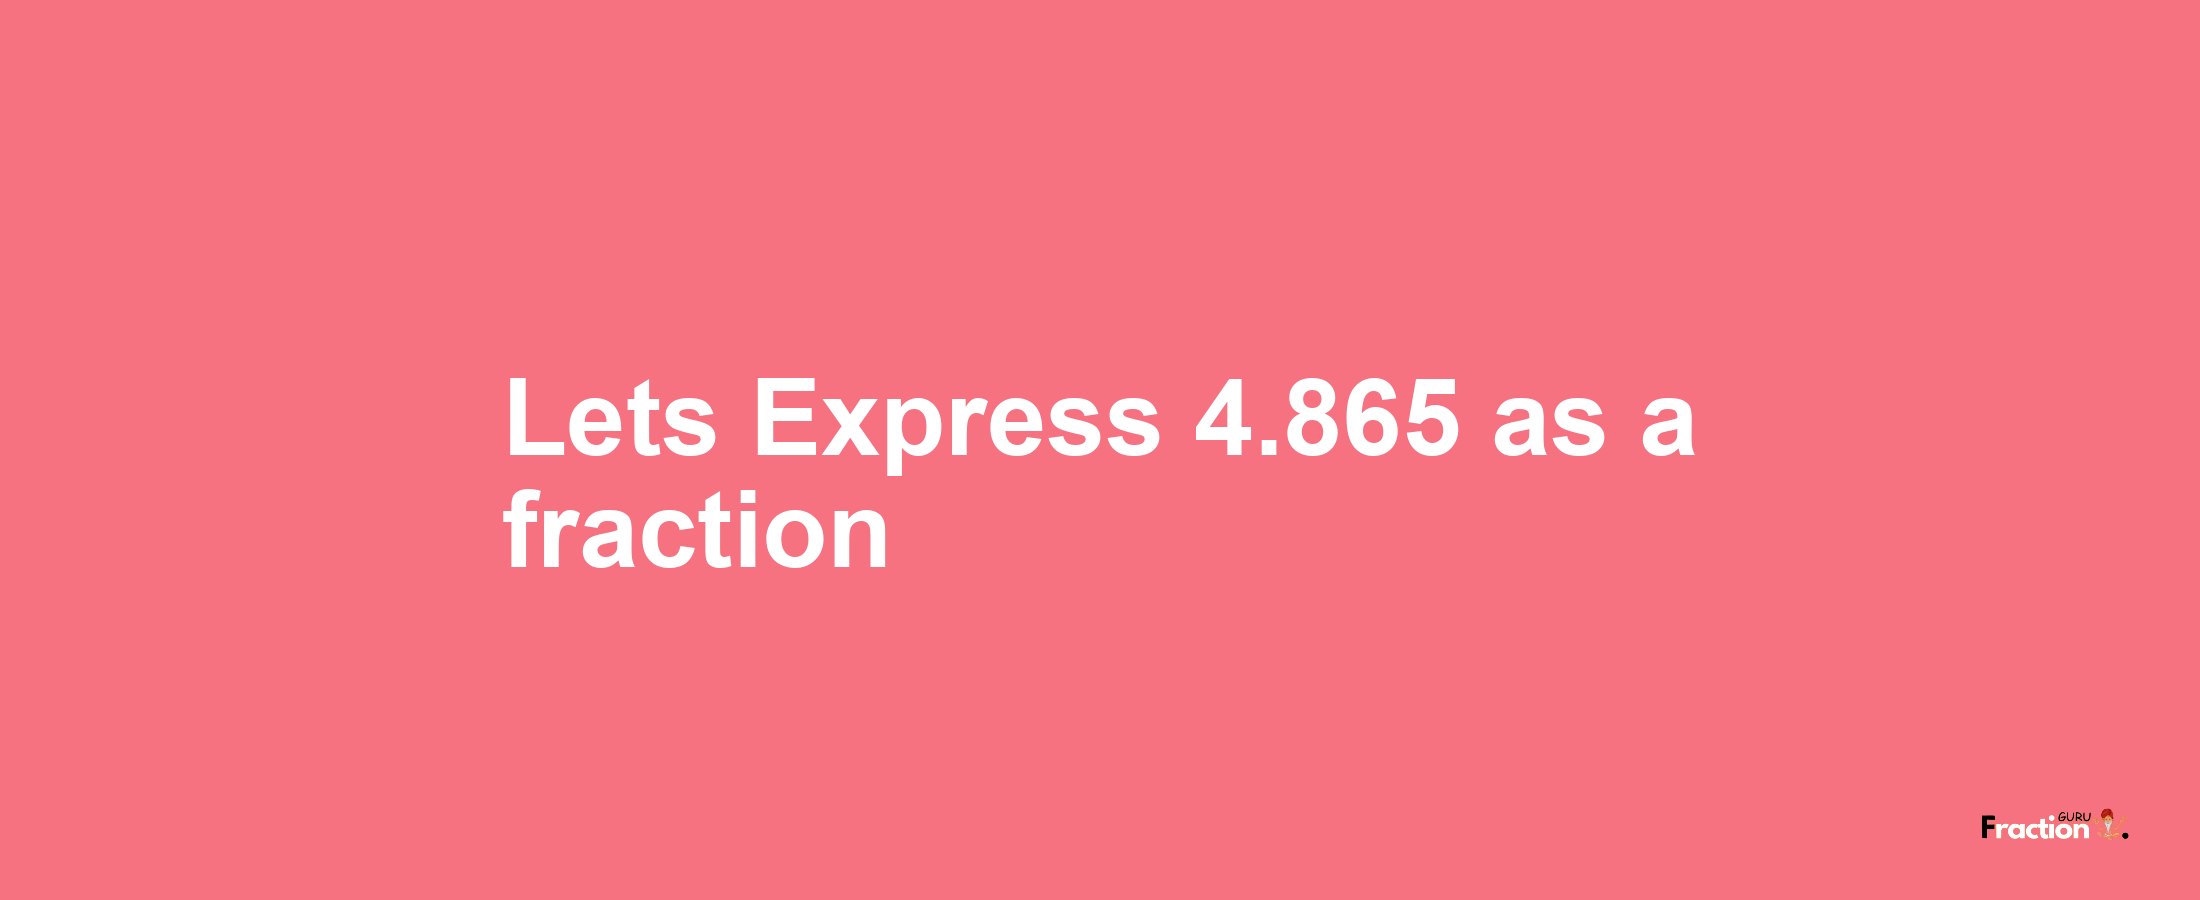 Lets Express 4.865 as afraction